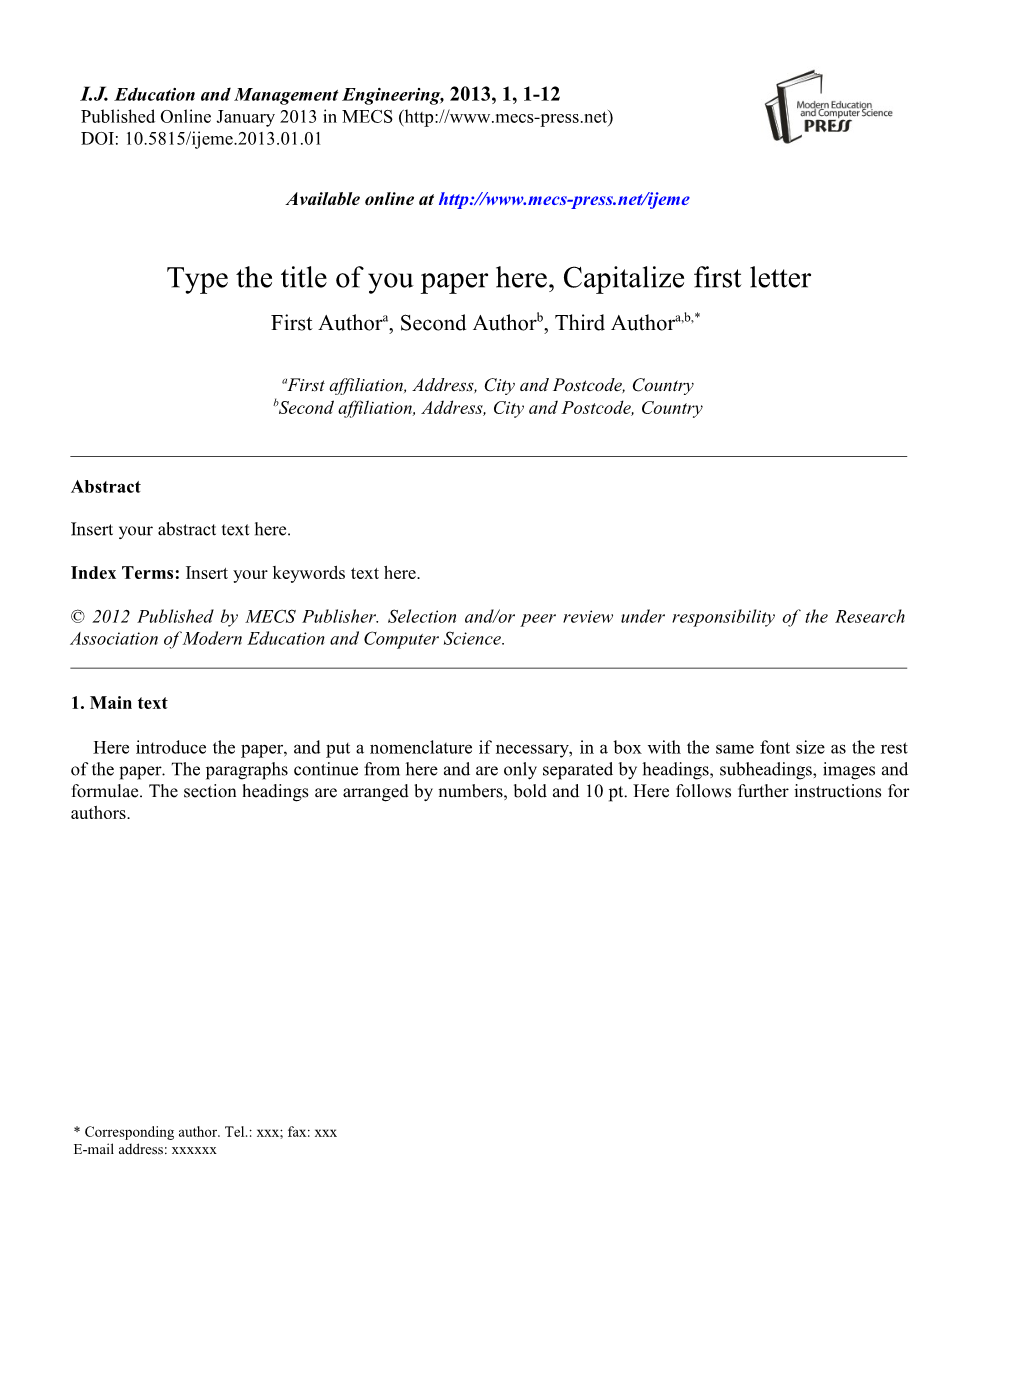 Type the Title of You Paper Here, Capitalize First Letter